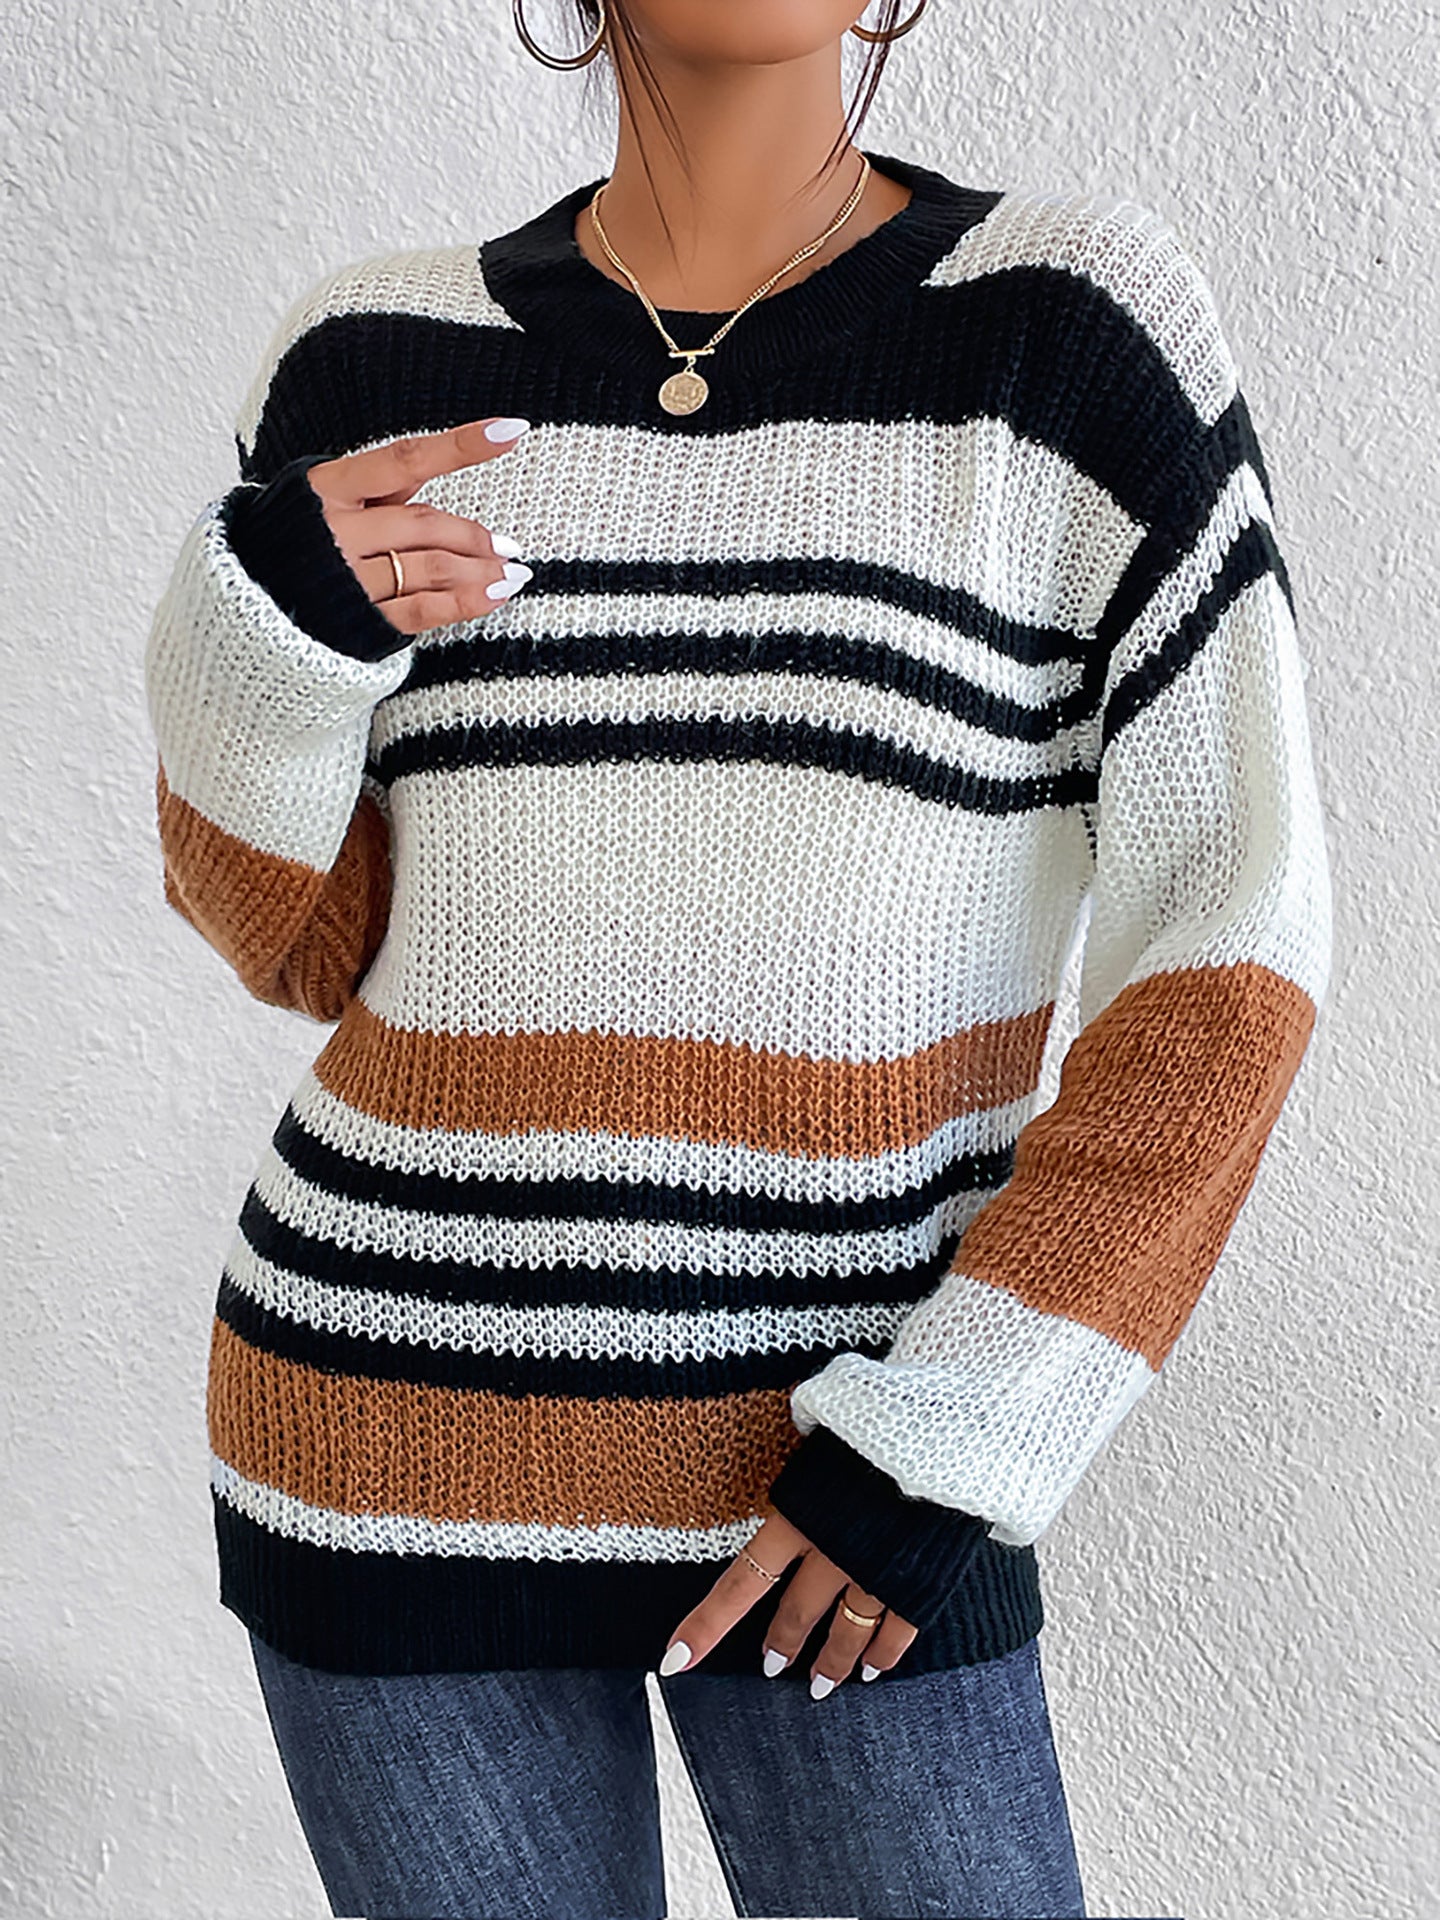 Women's Pullovers Mixed Color Stripes